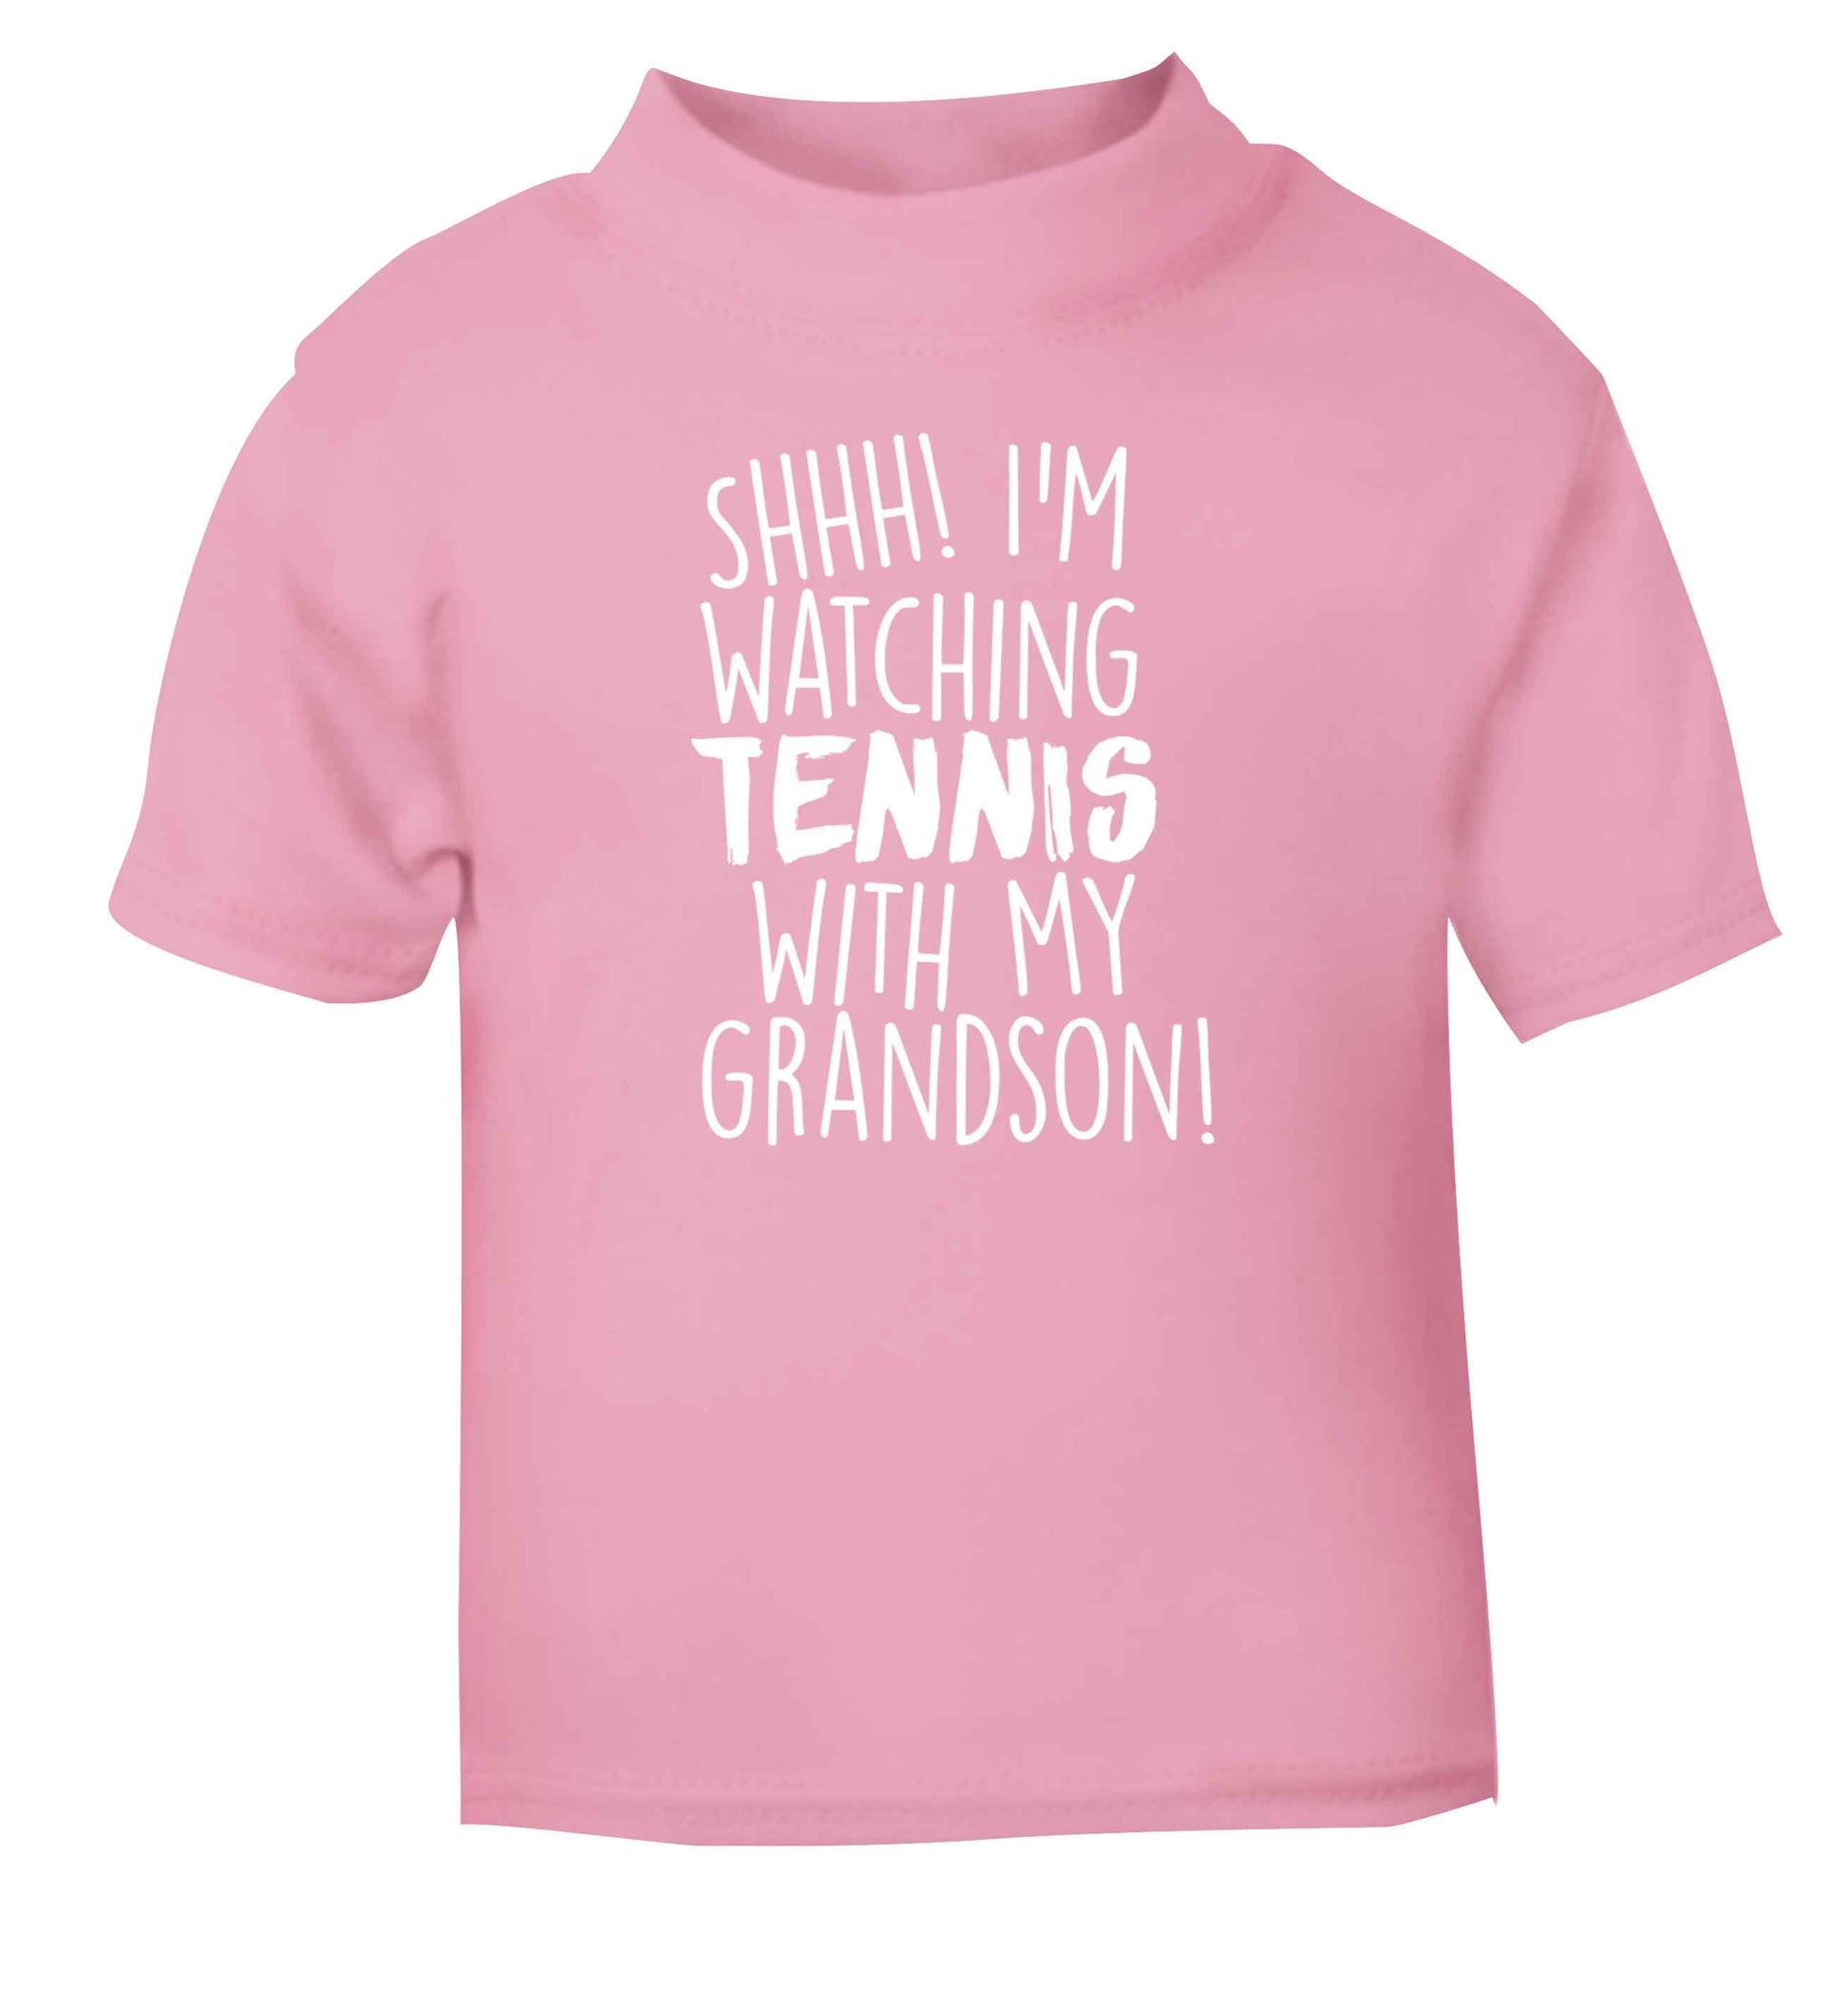 Shh! I'm watching tennis with my grandson! light pink Baby Toddler Tshirt 2 Years